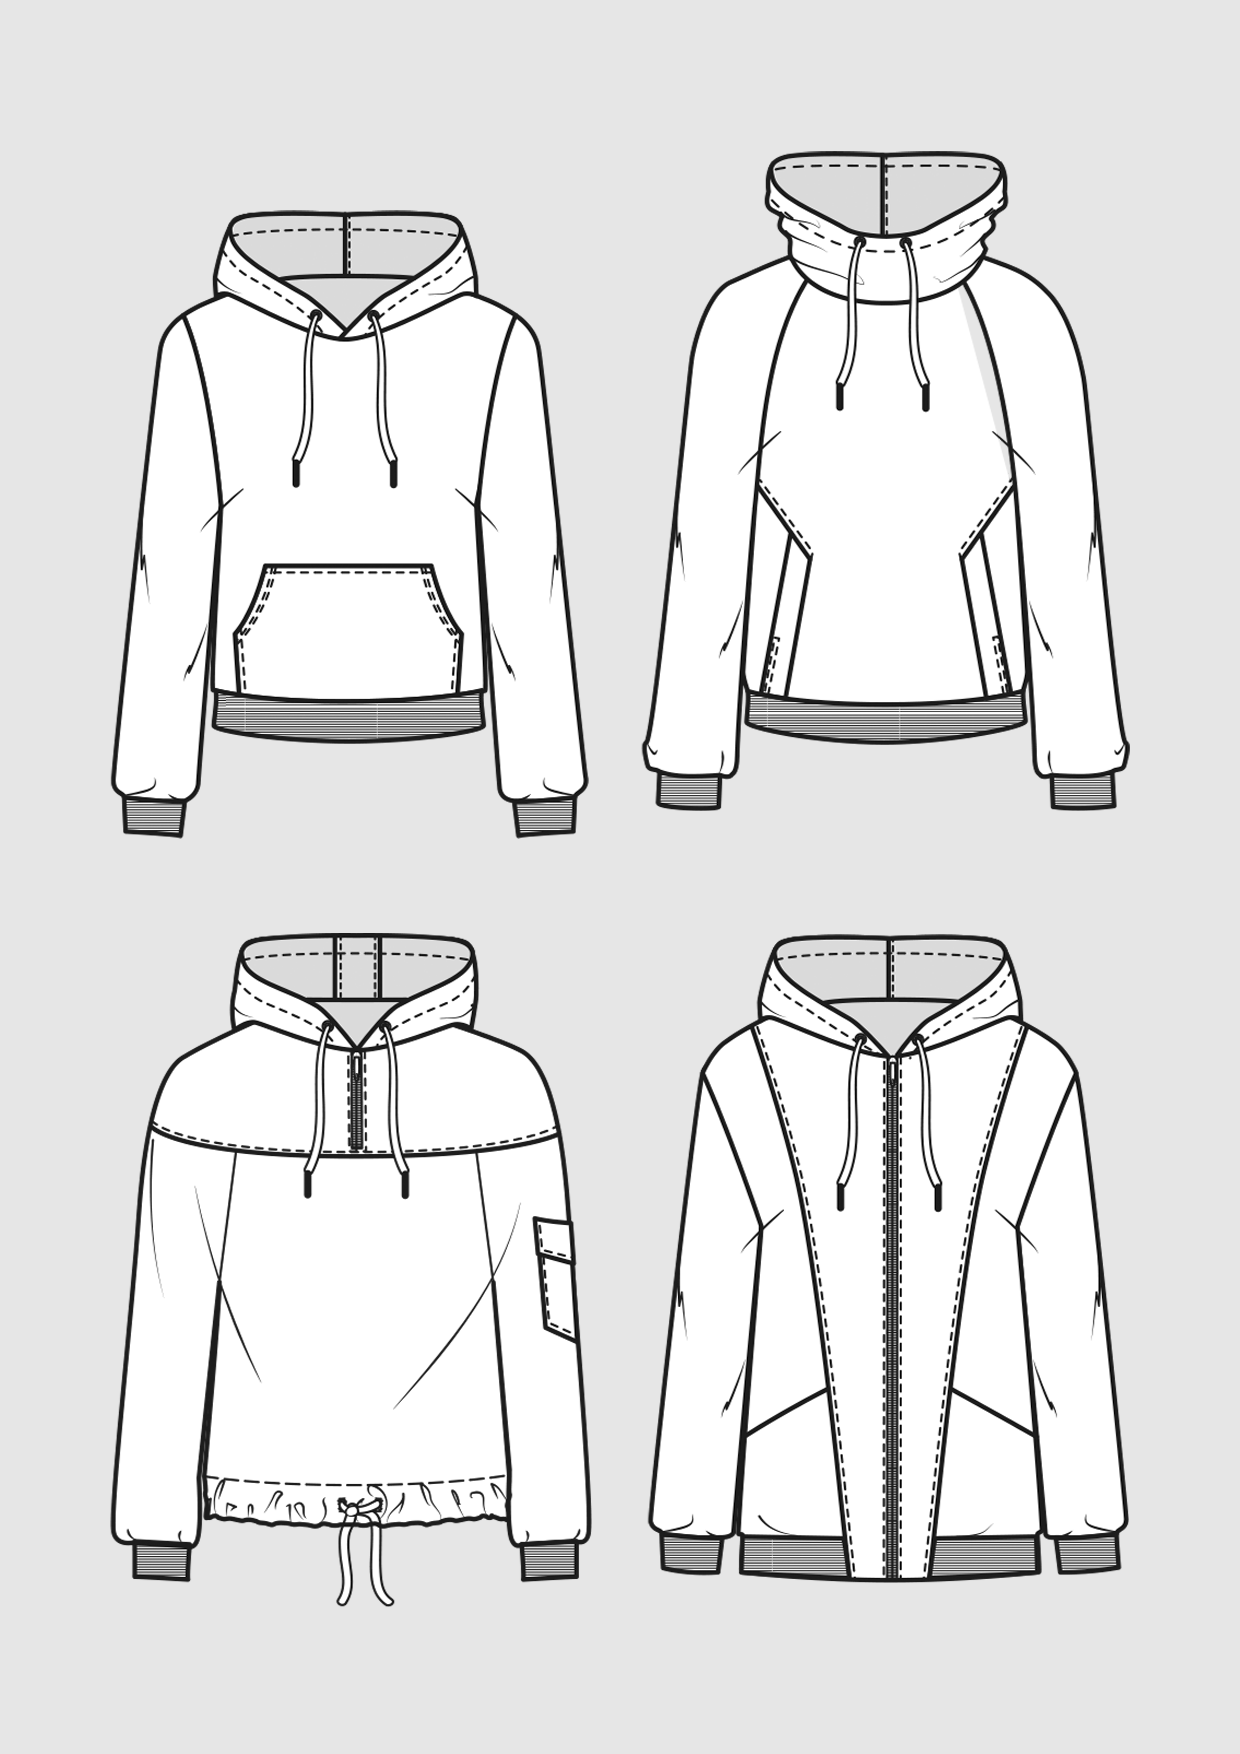 The Hoodie - Facts around the Allrounder